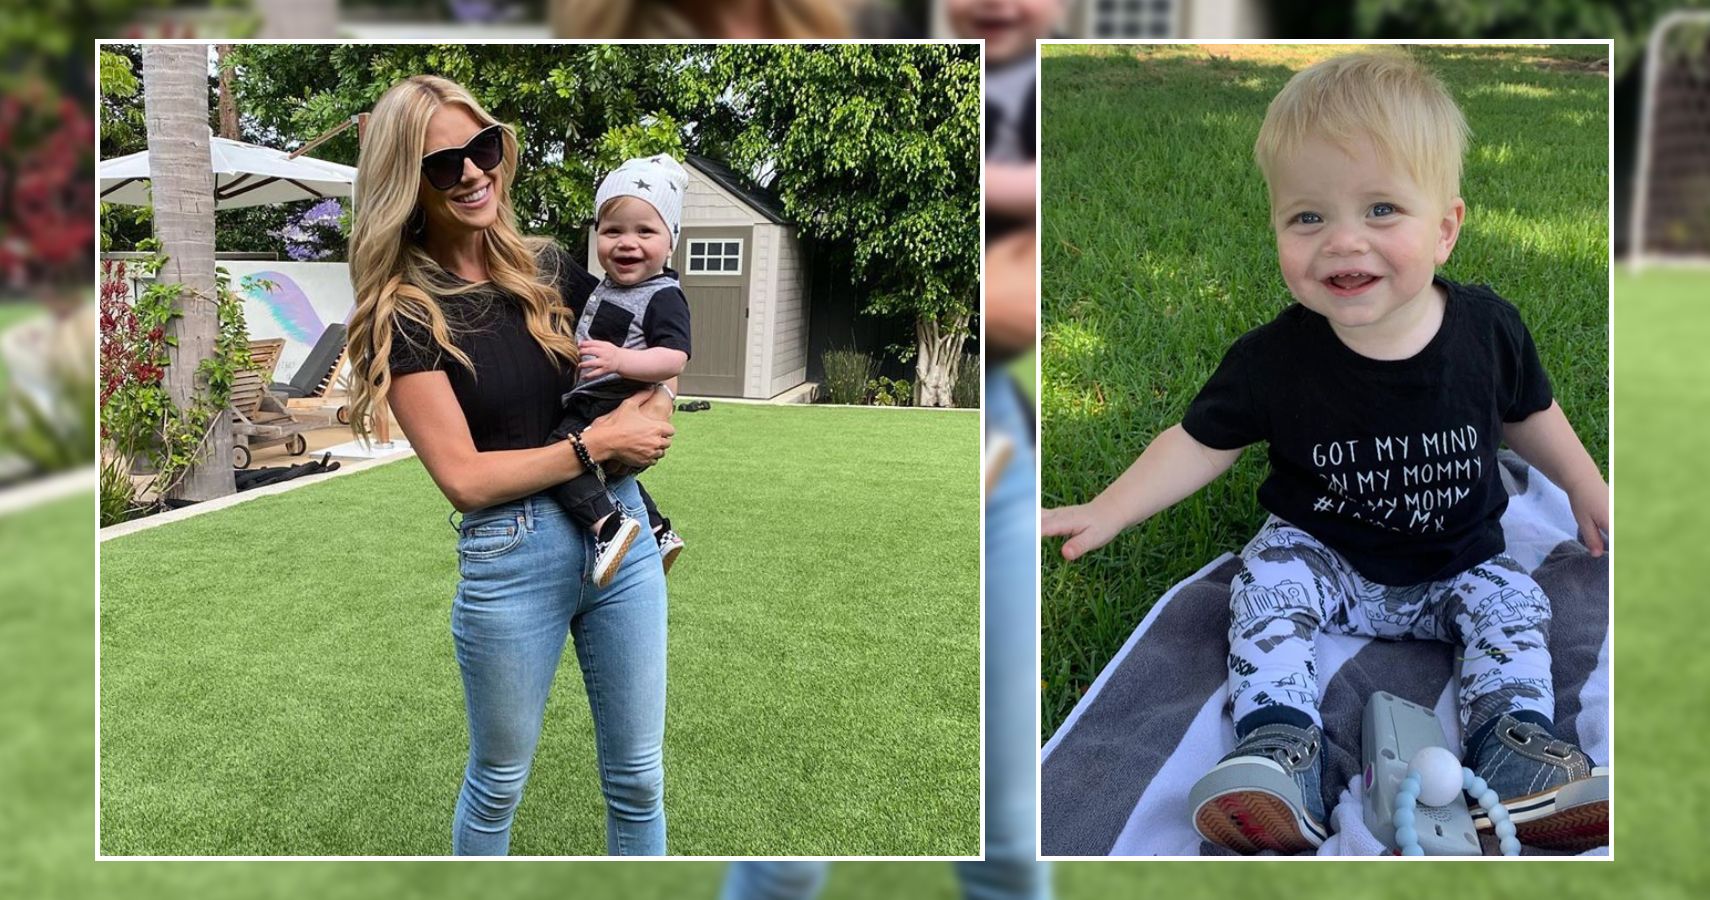 Christina Anstead Will Be No Stranger To Co-Parenting After 2nd Divorce